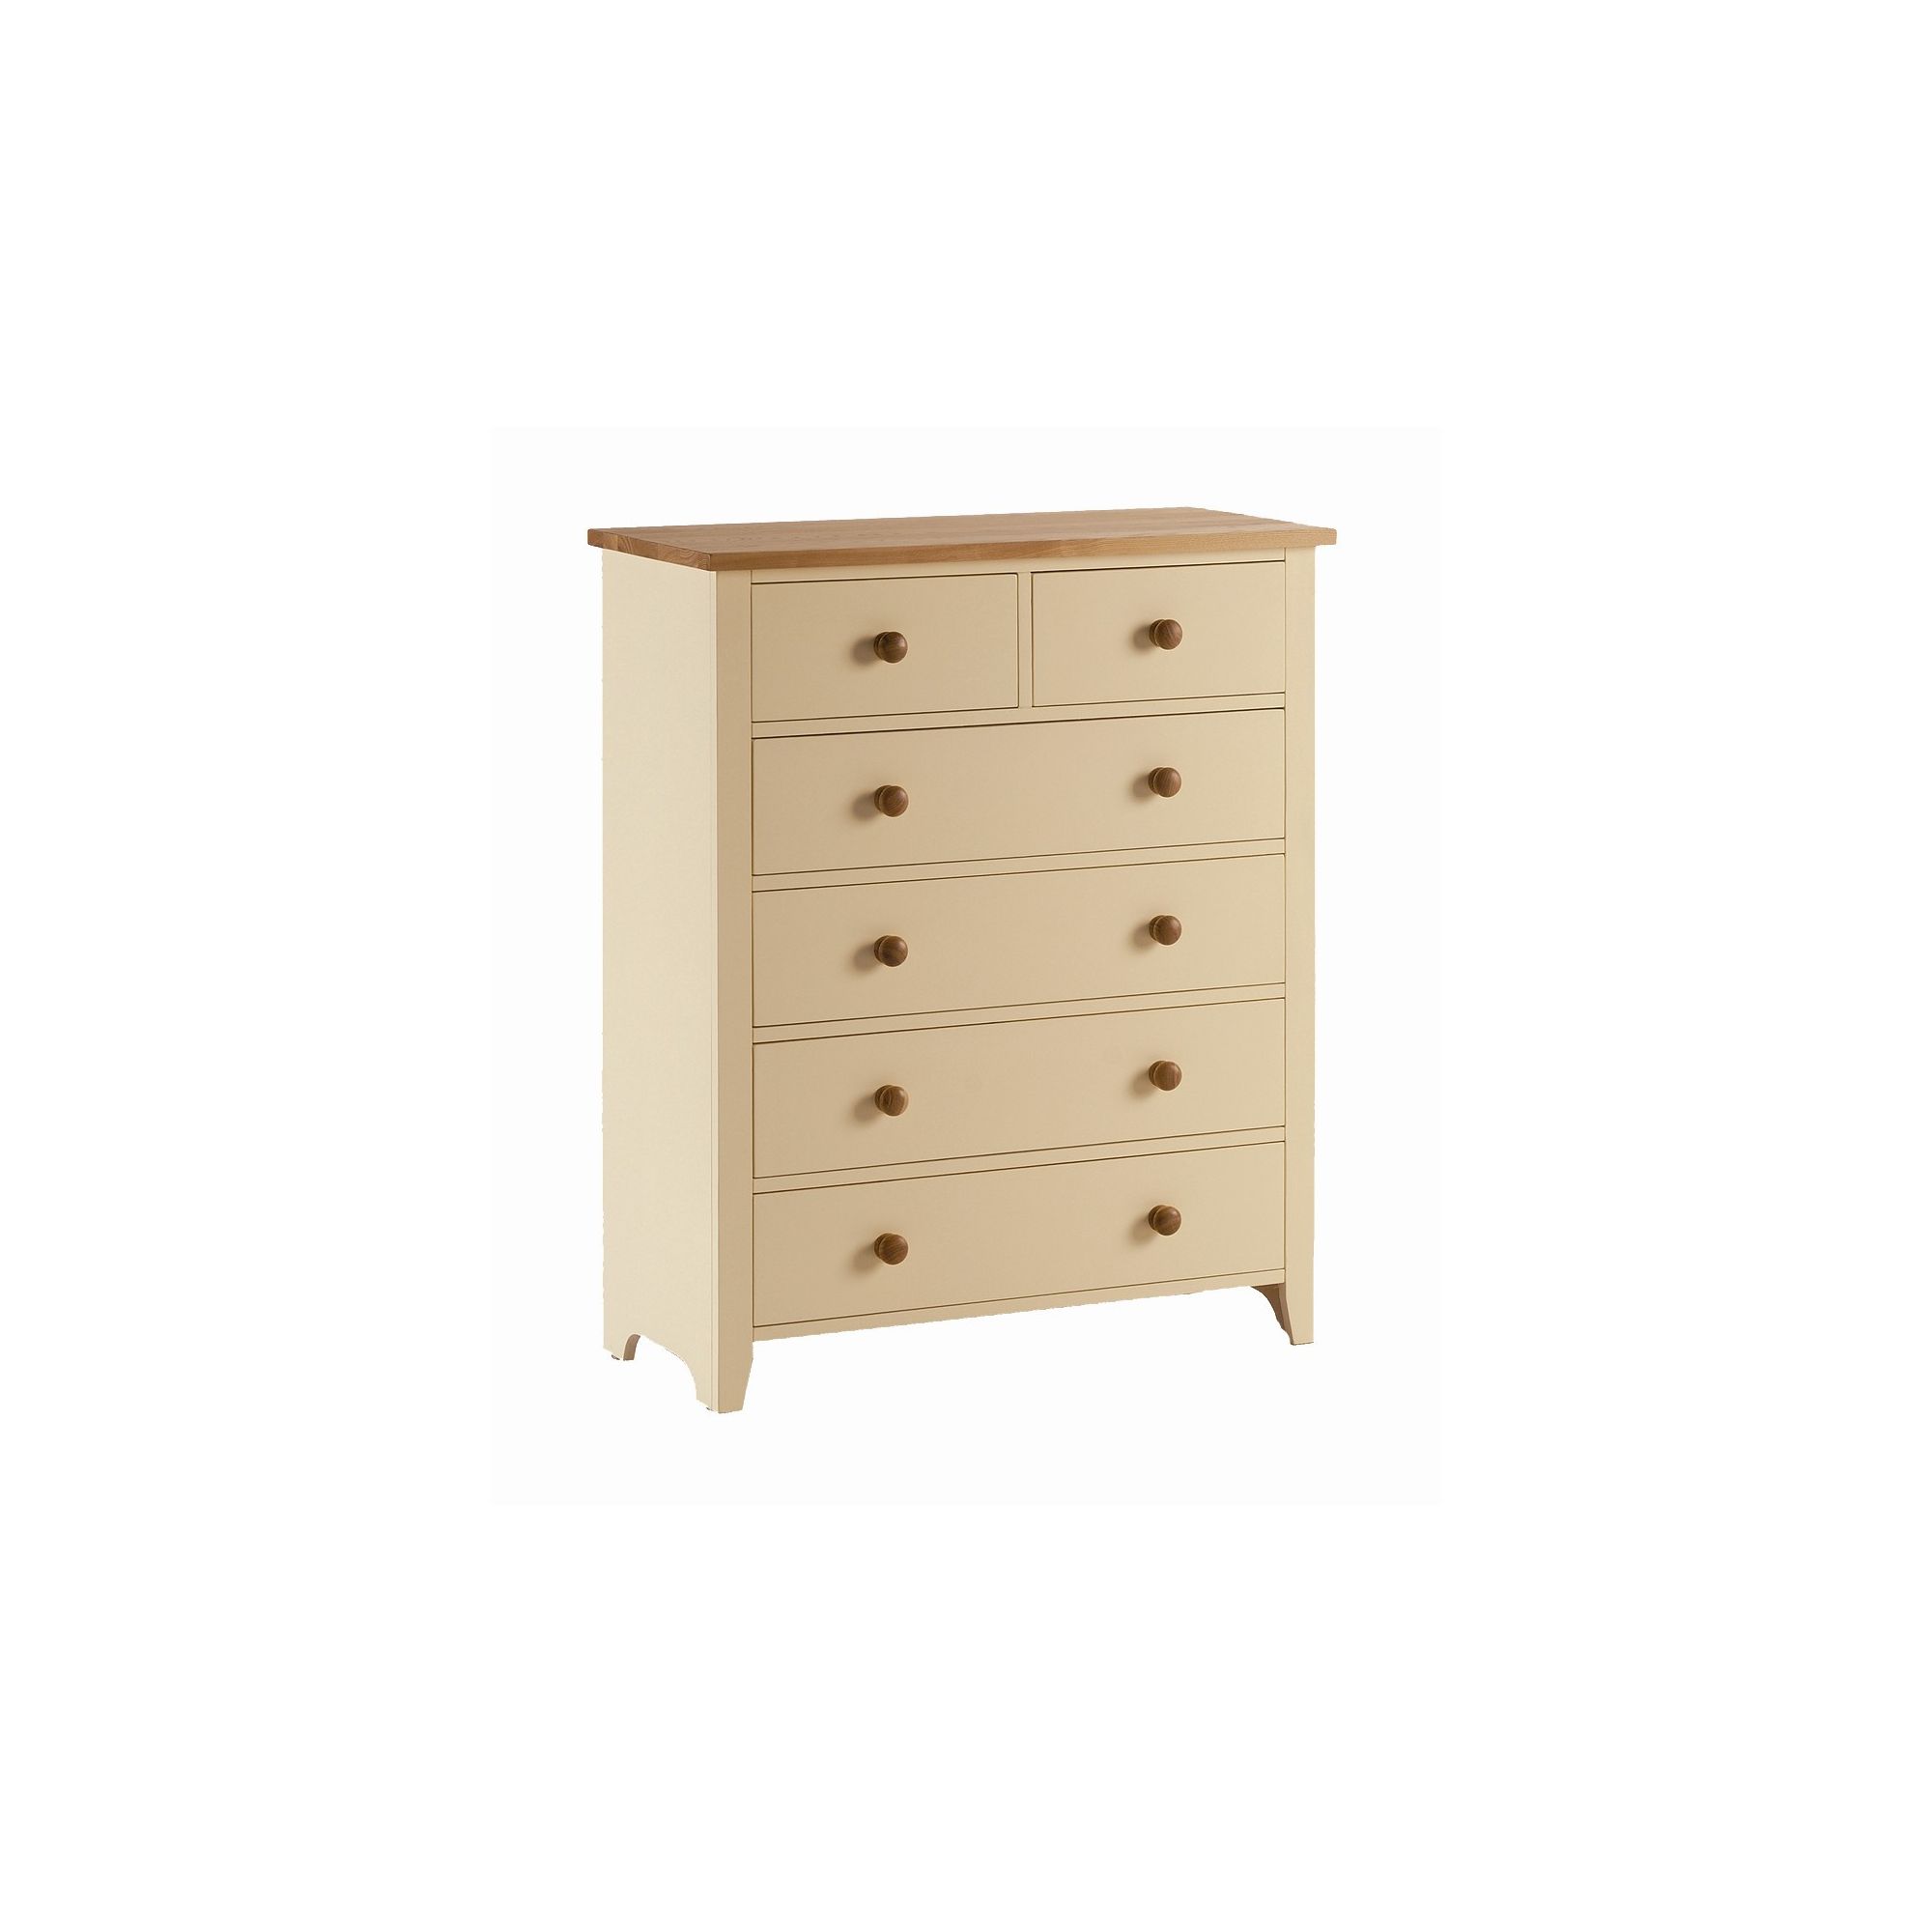 Kelburn Furniture Fanshawe Painted 2 Over 4 Chest of Drawers in Ivory at Tesco Direct